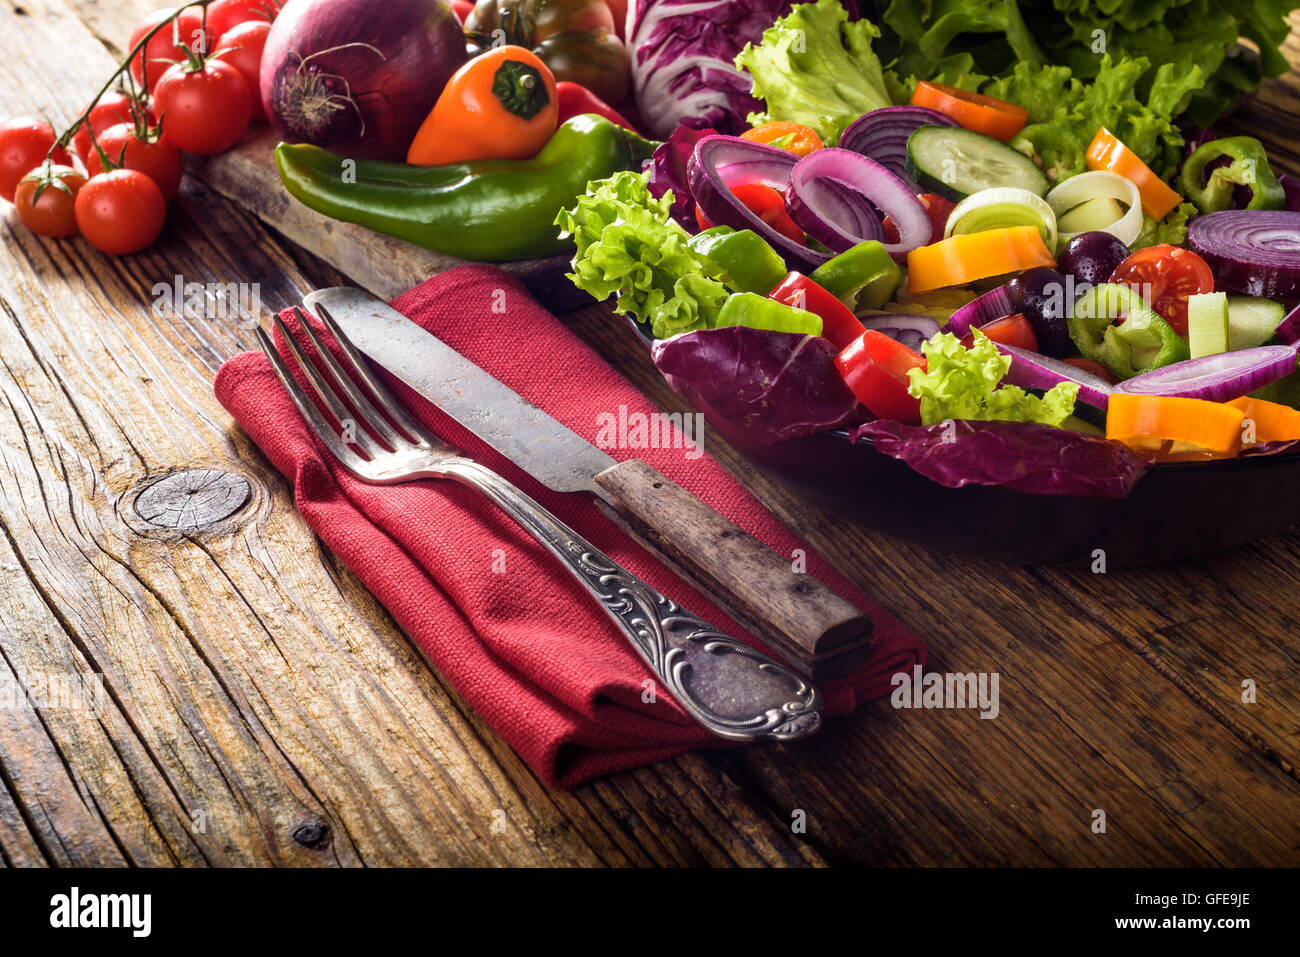 Spring salad with fresh juicy vegetables on a rustic wooden table. Stock Photo